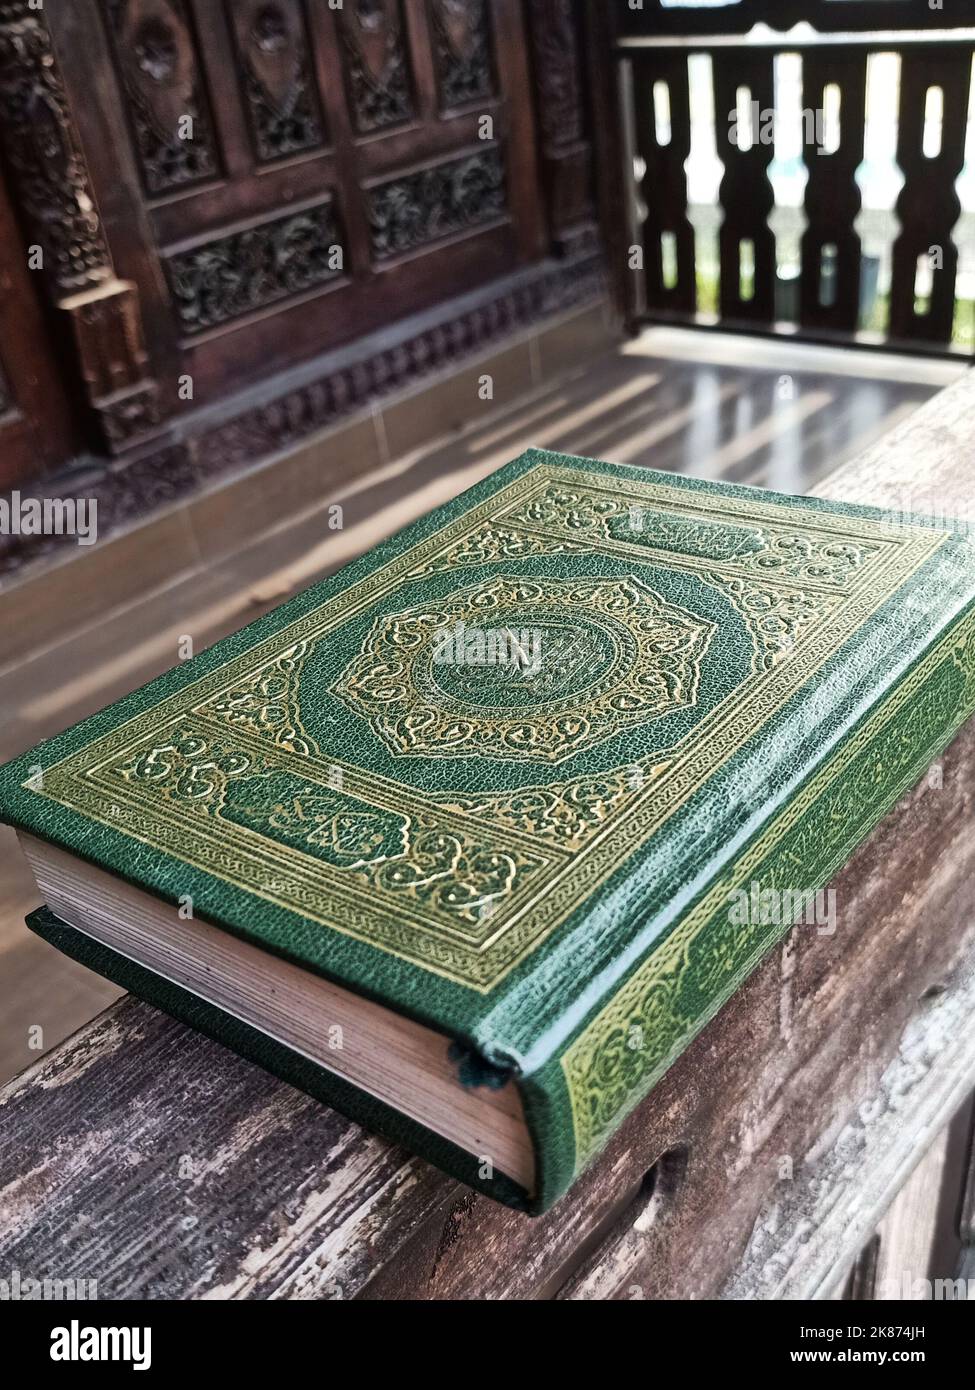 The book of the Al Quran, the holy book for Muslims is placed on the fence of the wooden pavilion where the students read and memorize the Koran Stock Photo